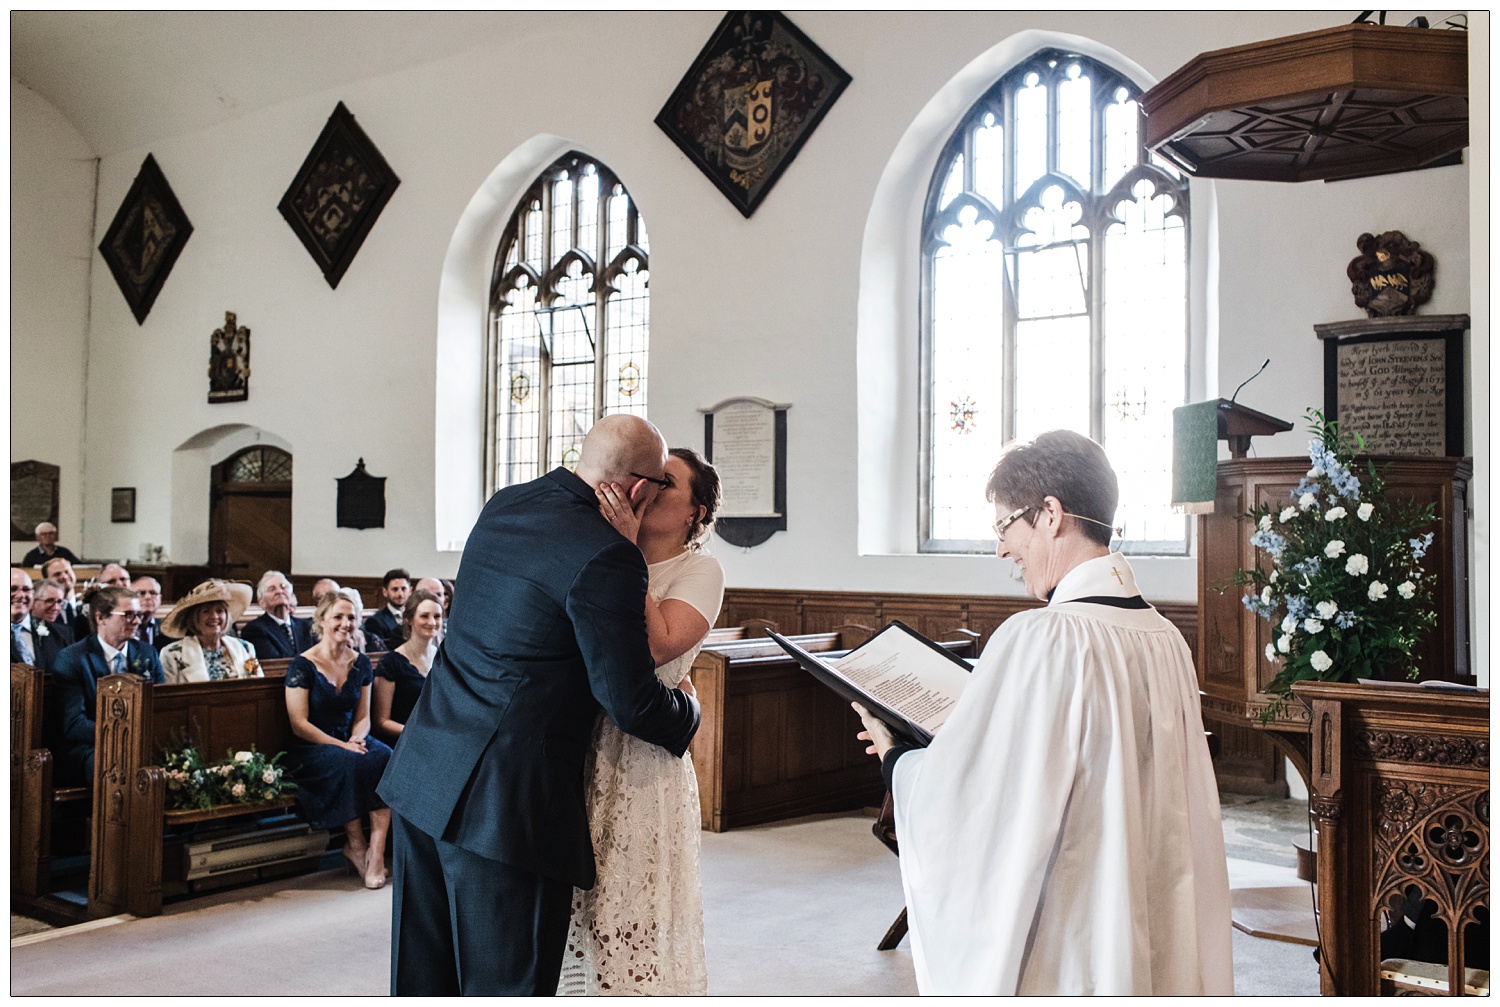 The newly married couple kiss during wedding ceremony at All Saints with St Peter Church of England Maldon